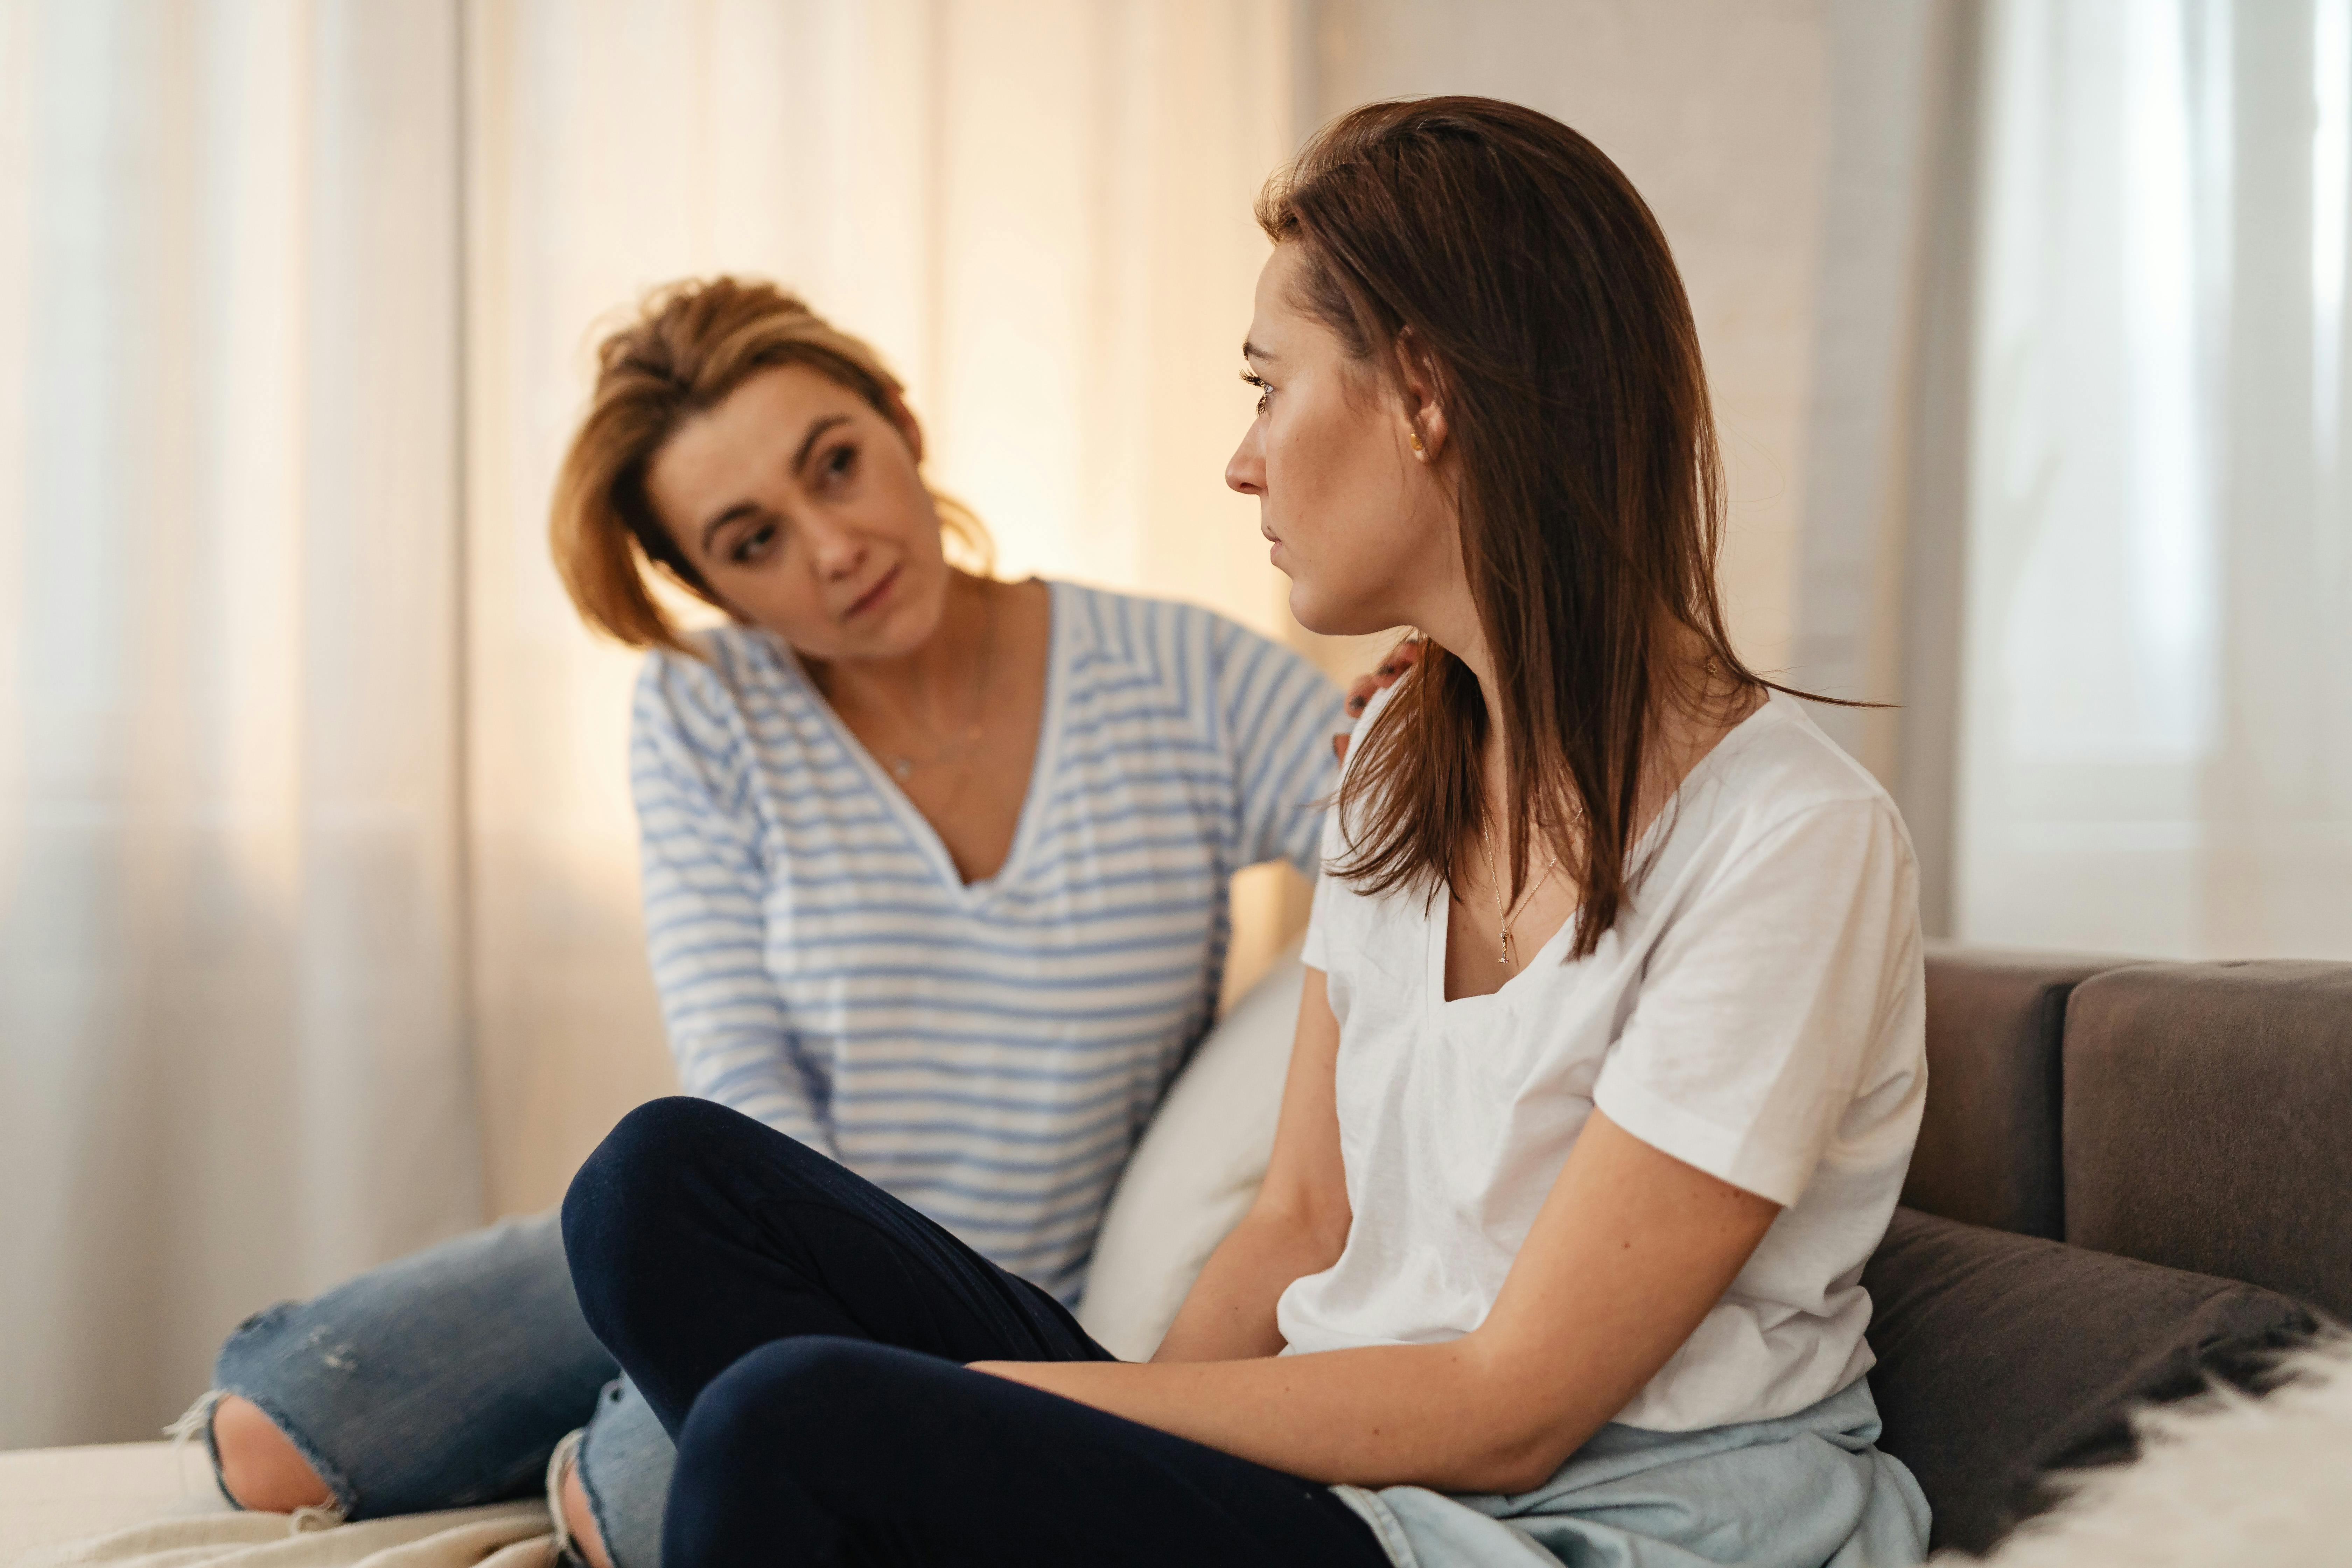 A mother and her grownup daughter on talking on the couch | Source: Pexels